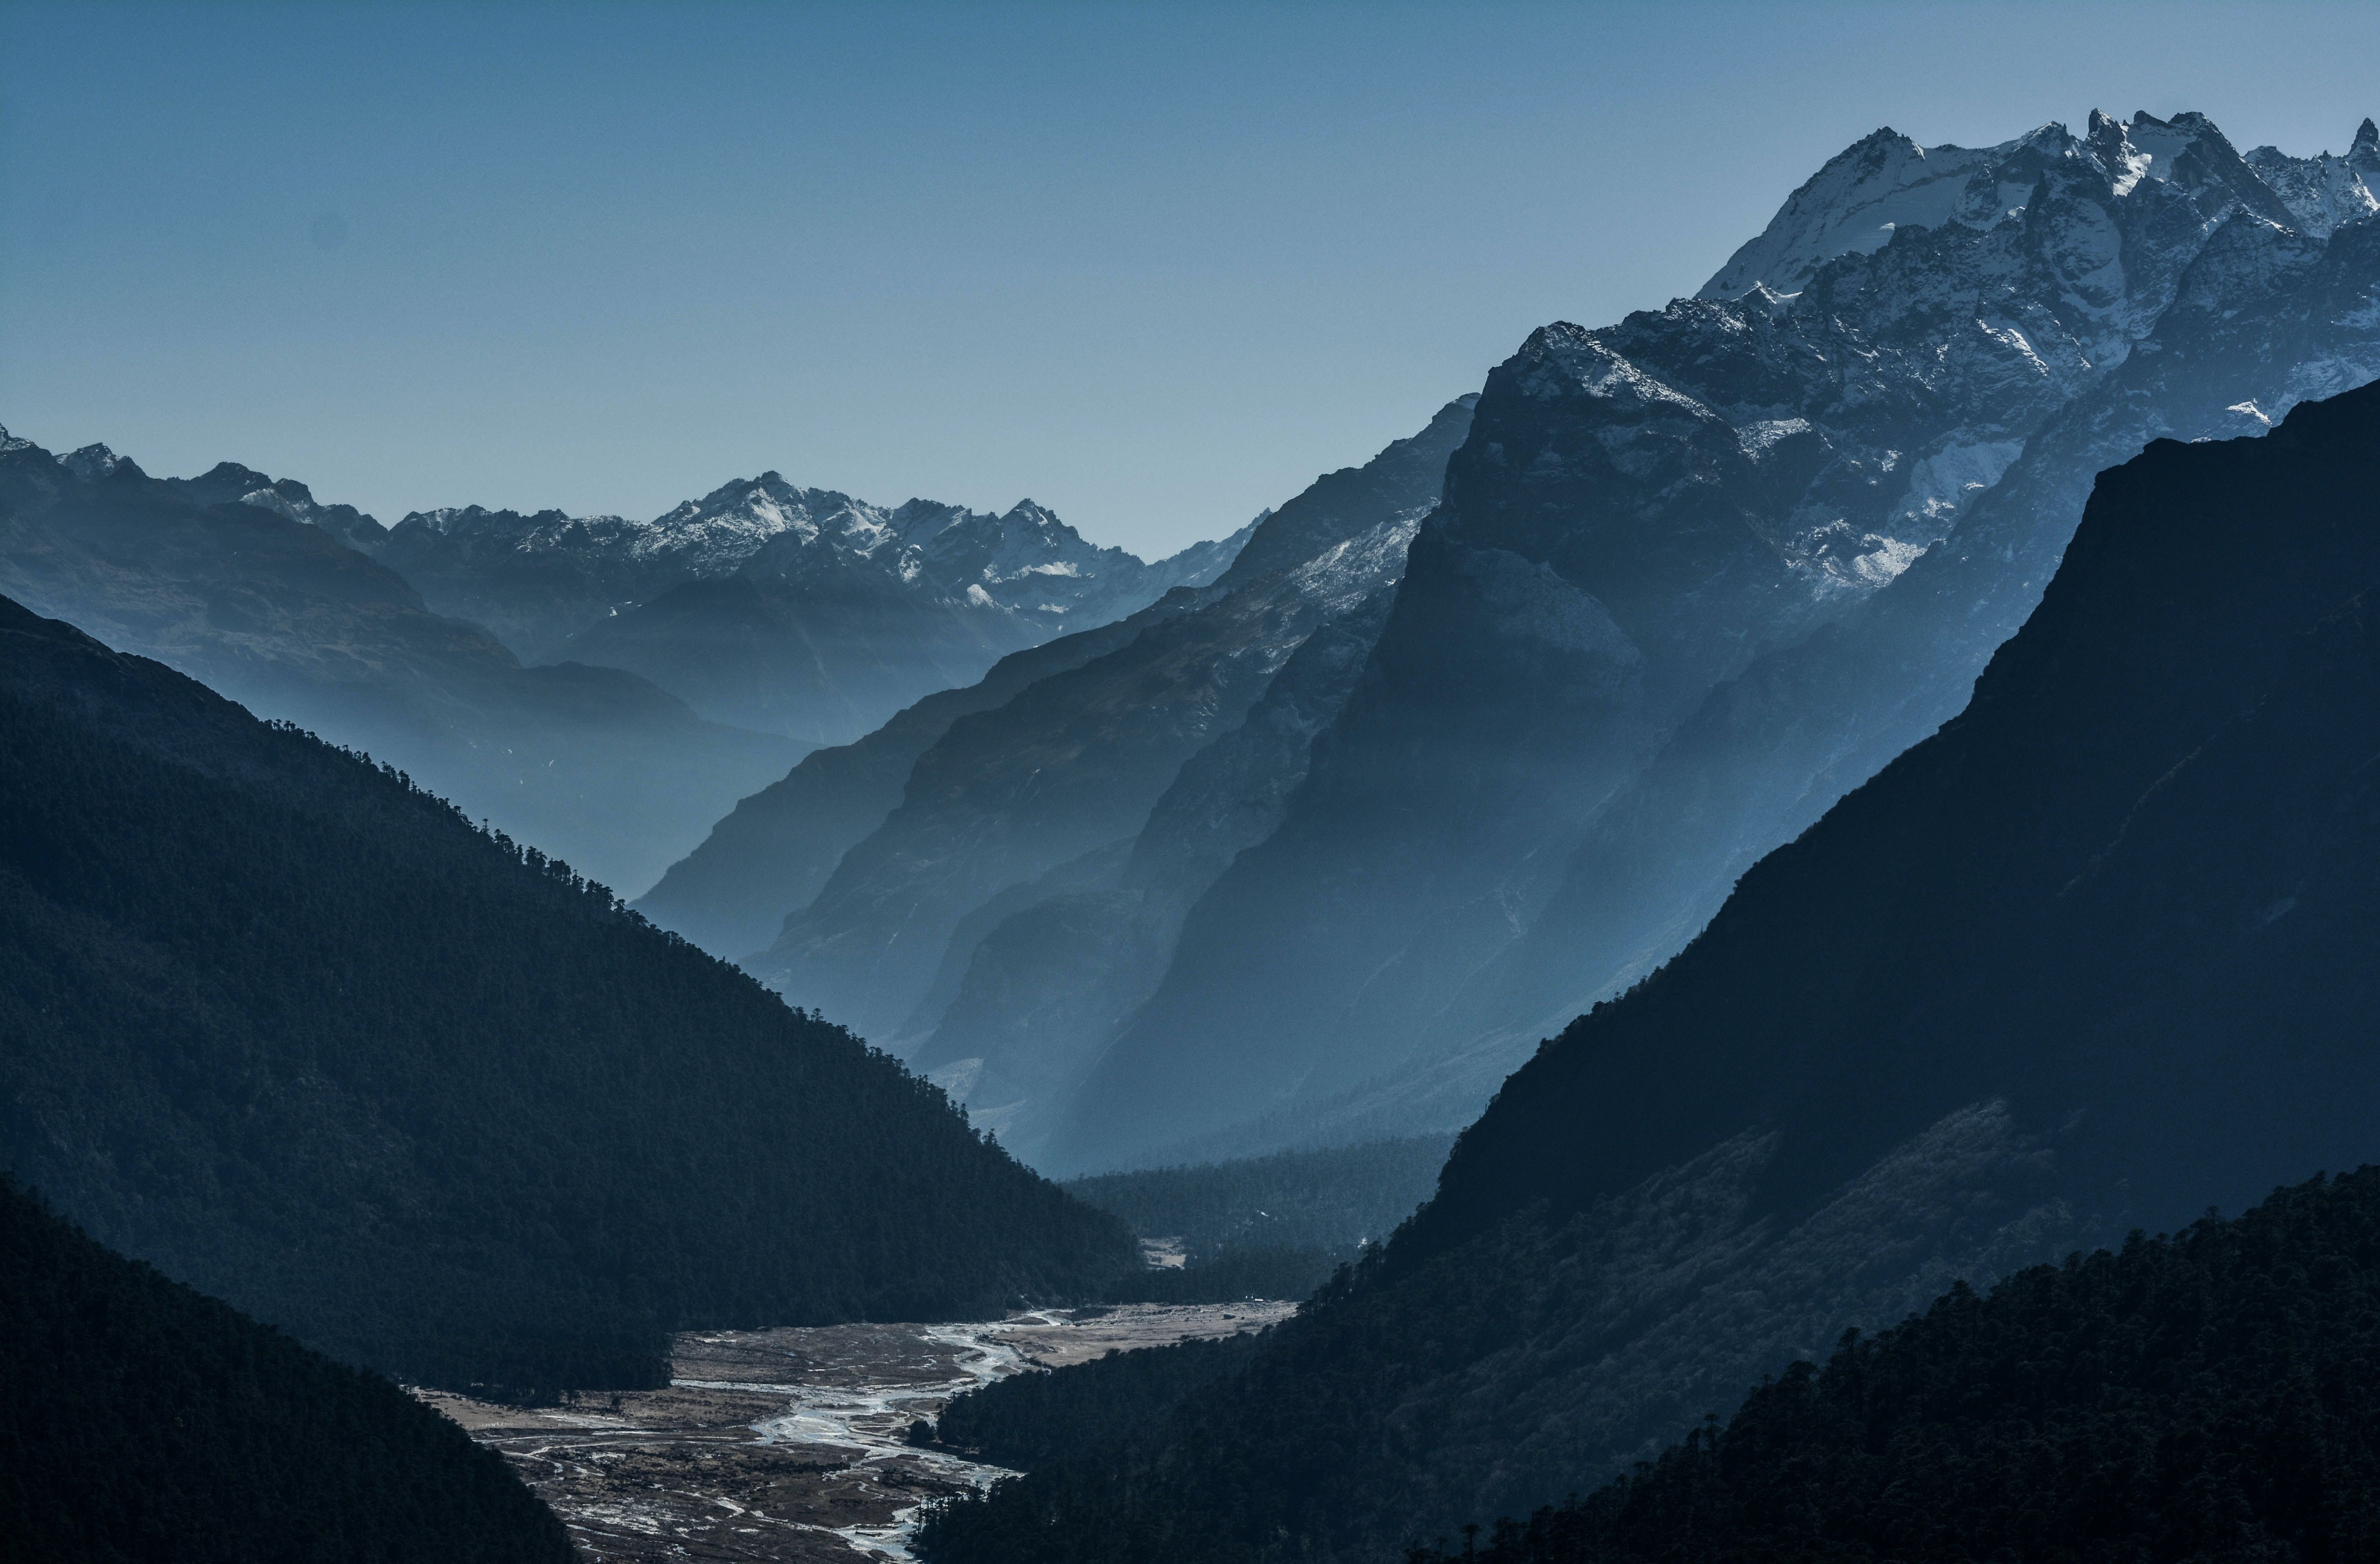 Sikkim Picture. Download Free Image